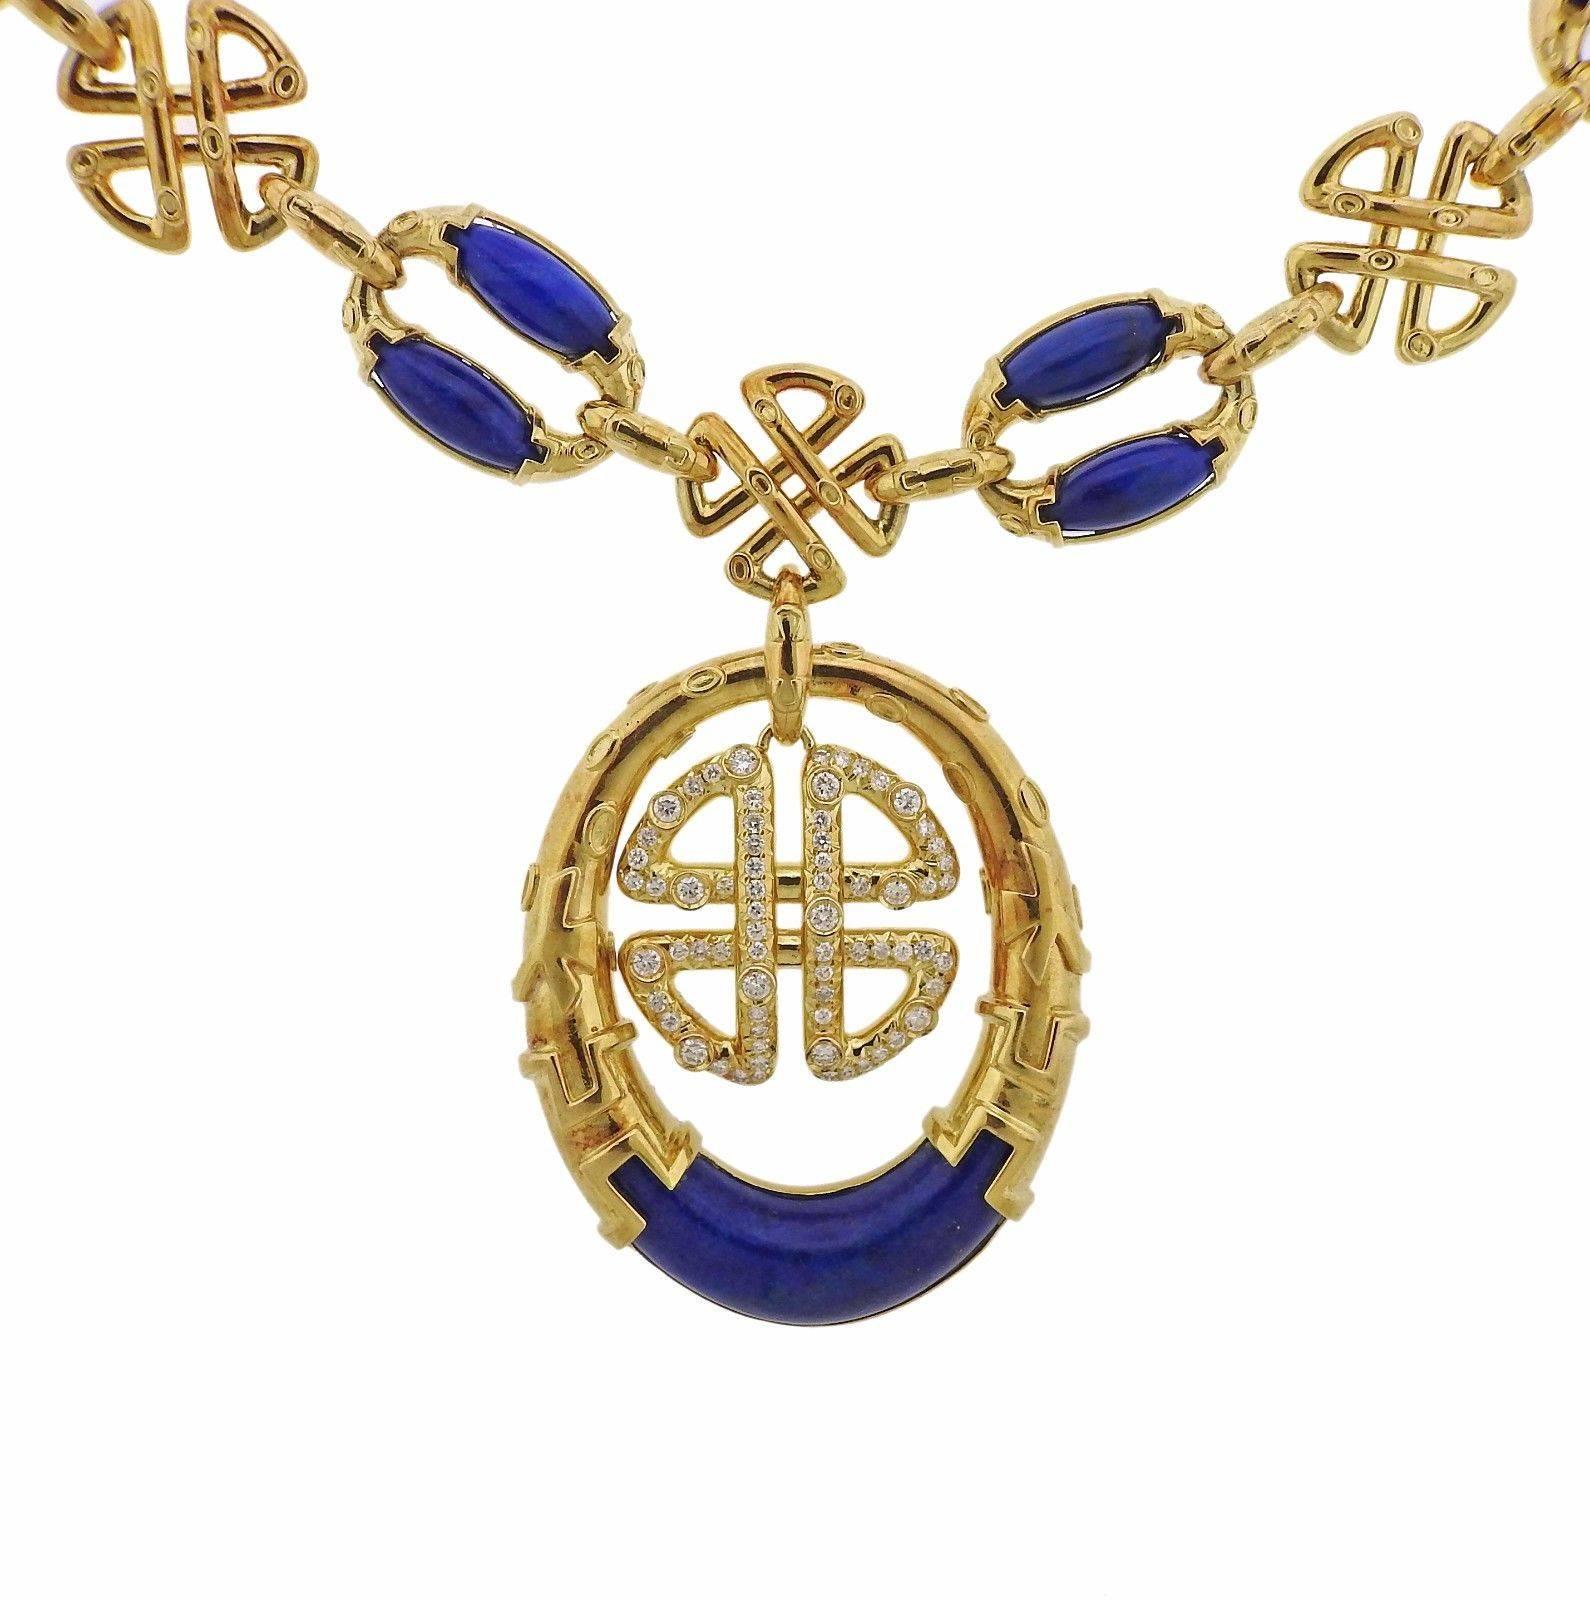 An 18k yellow gold necklace set with lapis and approximately 1.64ctw of H/VS-SI diamonds.  The necklace measures 23" long and the pendant is 70mm x 43mm.  The weight of the piece is 138.3 grams. Marked: 750, NM.